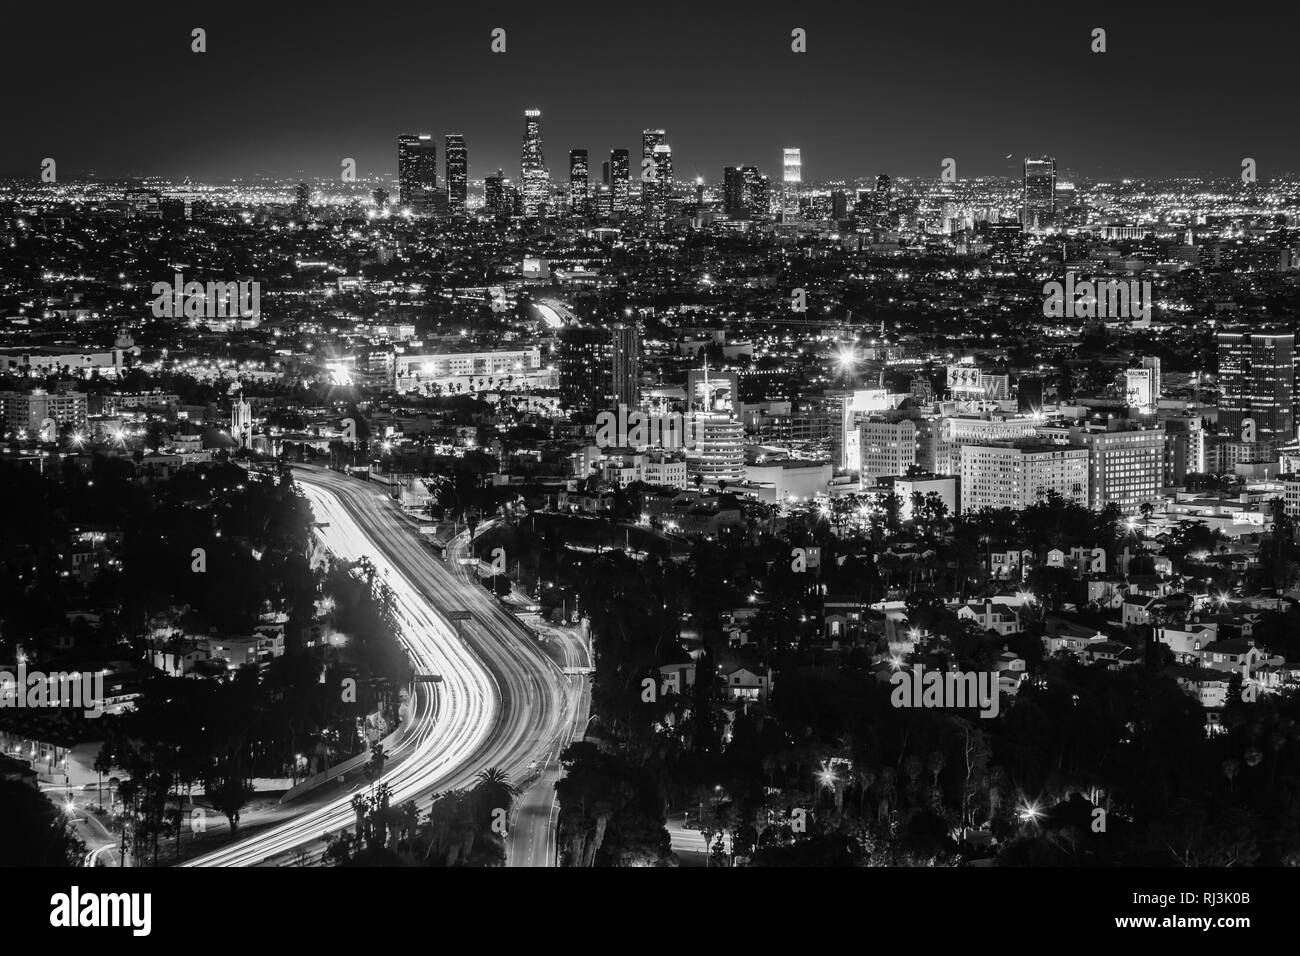 View of the Los Angeles Skyline and Hollywood at night from the Hollywood Bowl Overlook, in Los Angeles, California. Stock Photo